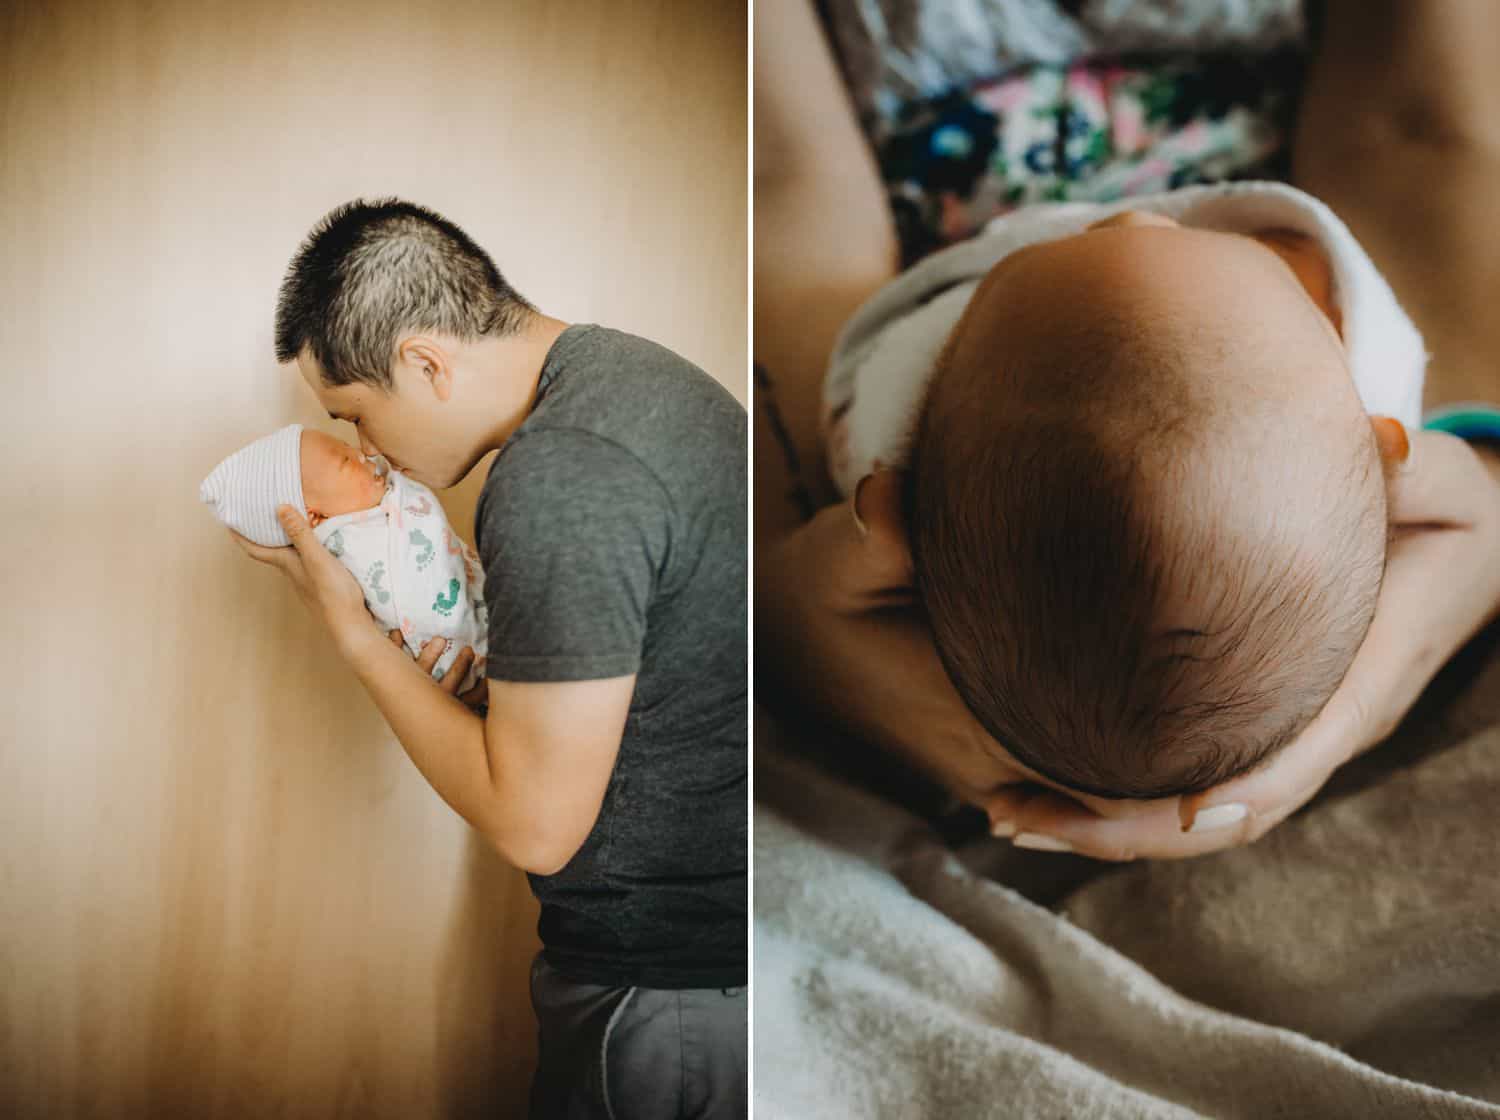 In this diptych, a father touches noses with his newborn baby against a sun-dappled wall. In the next photo, the newborn's head is cradled by the mother's hands.